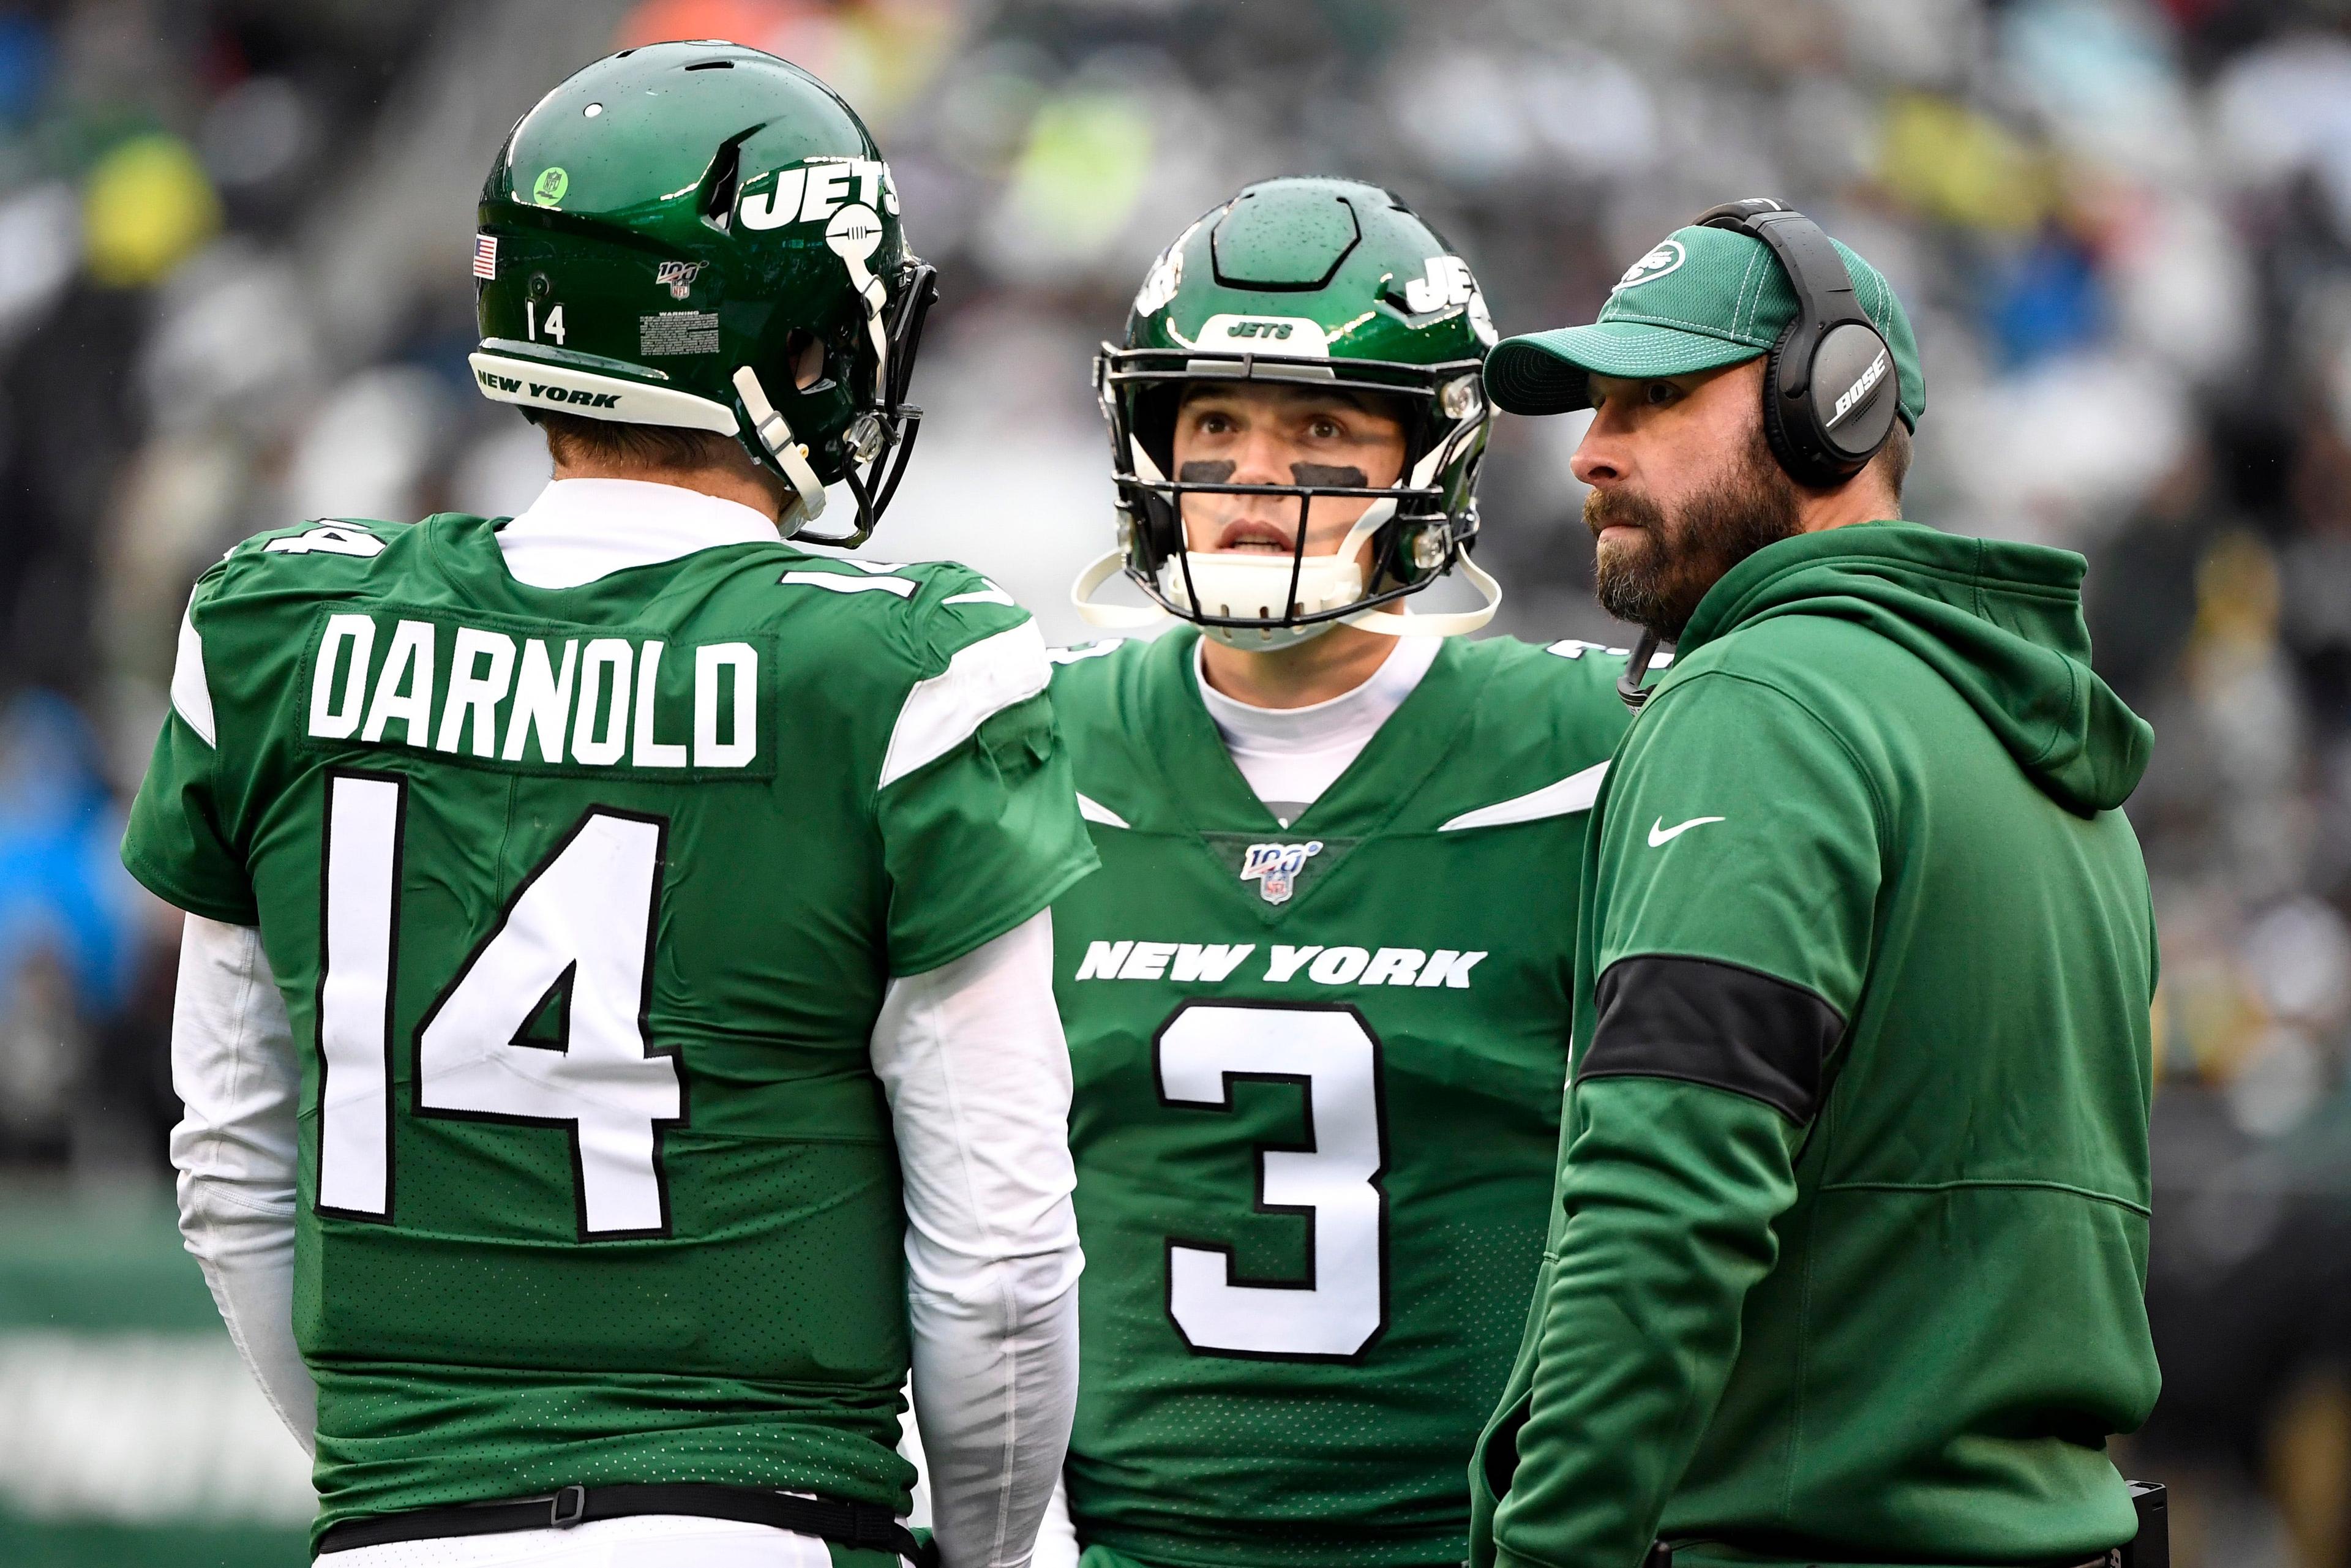 New York Jets head coach Adam Gase, far right, talks with quarterbacks Sam Darnold (14) and David Fales (3) during an Oakland Raider challenge in the first half of an NFL game at MetLife Stadium on Sunday, Nov. 24, 2019, on East Rutherford. / © Danielle Parhizkaran/NorthJersey.com, NorthJersey.com via Imagn Content Services, LLC